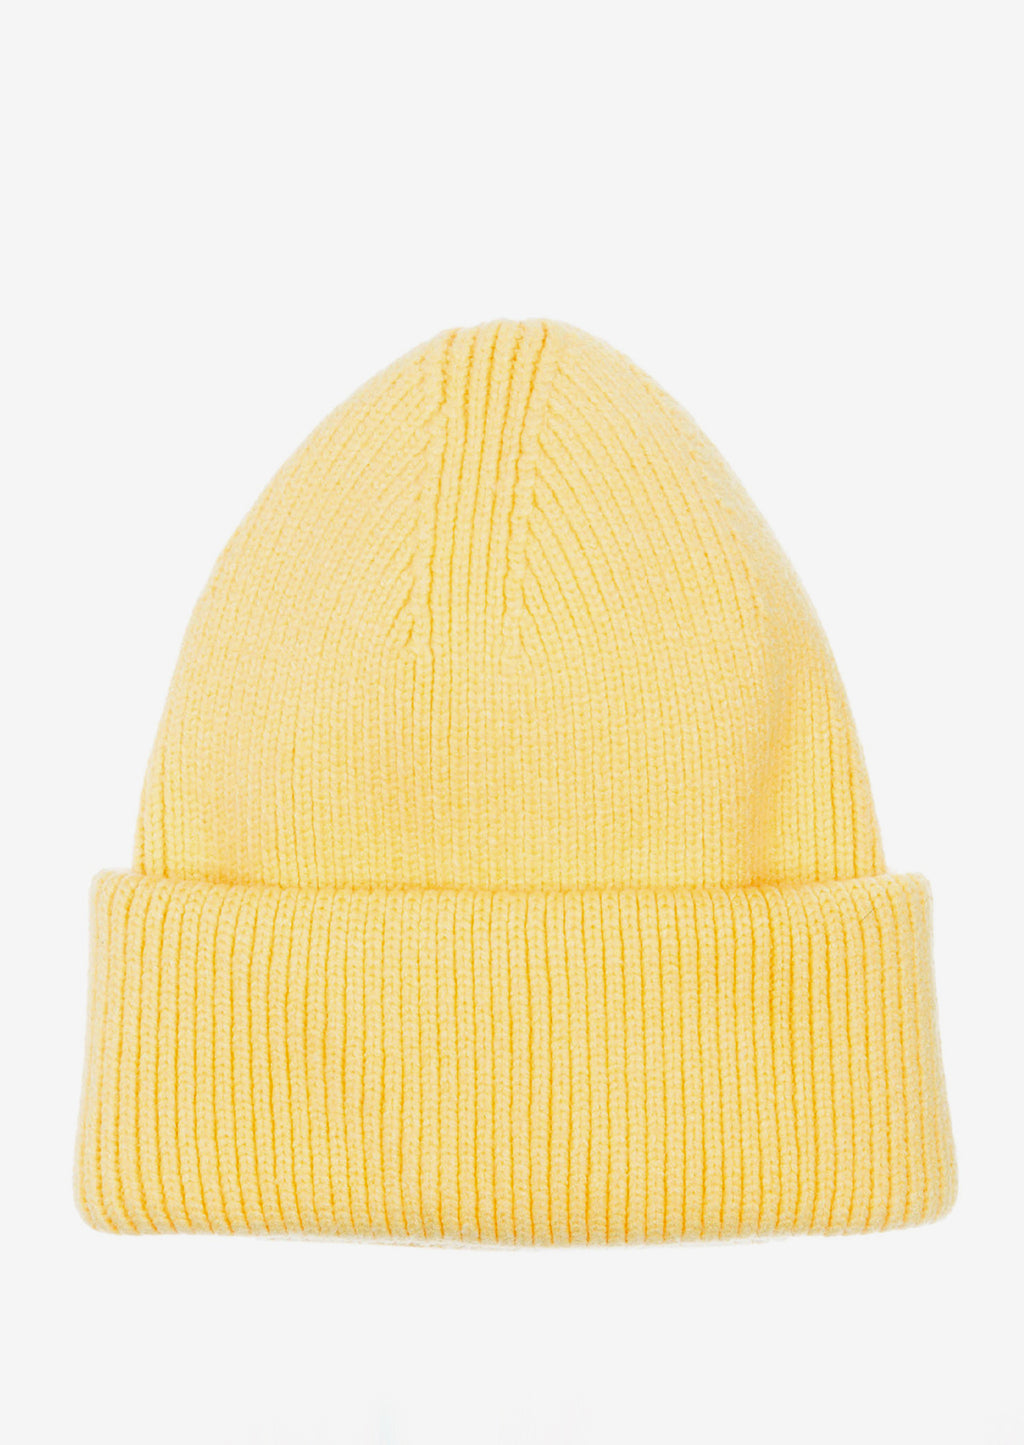 Lemon: A knit beanie with oversized cuff in lemon yellow color.